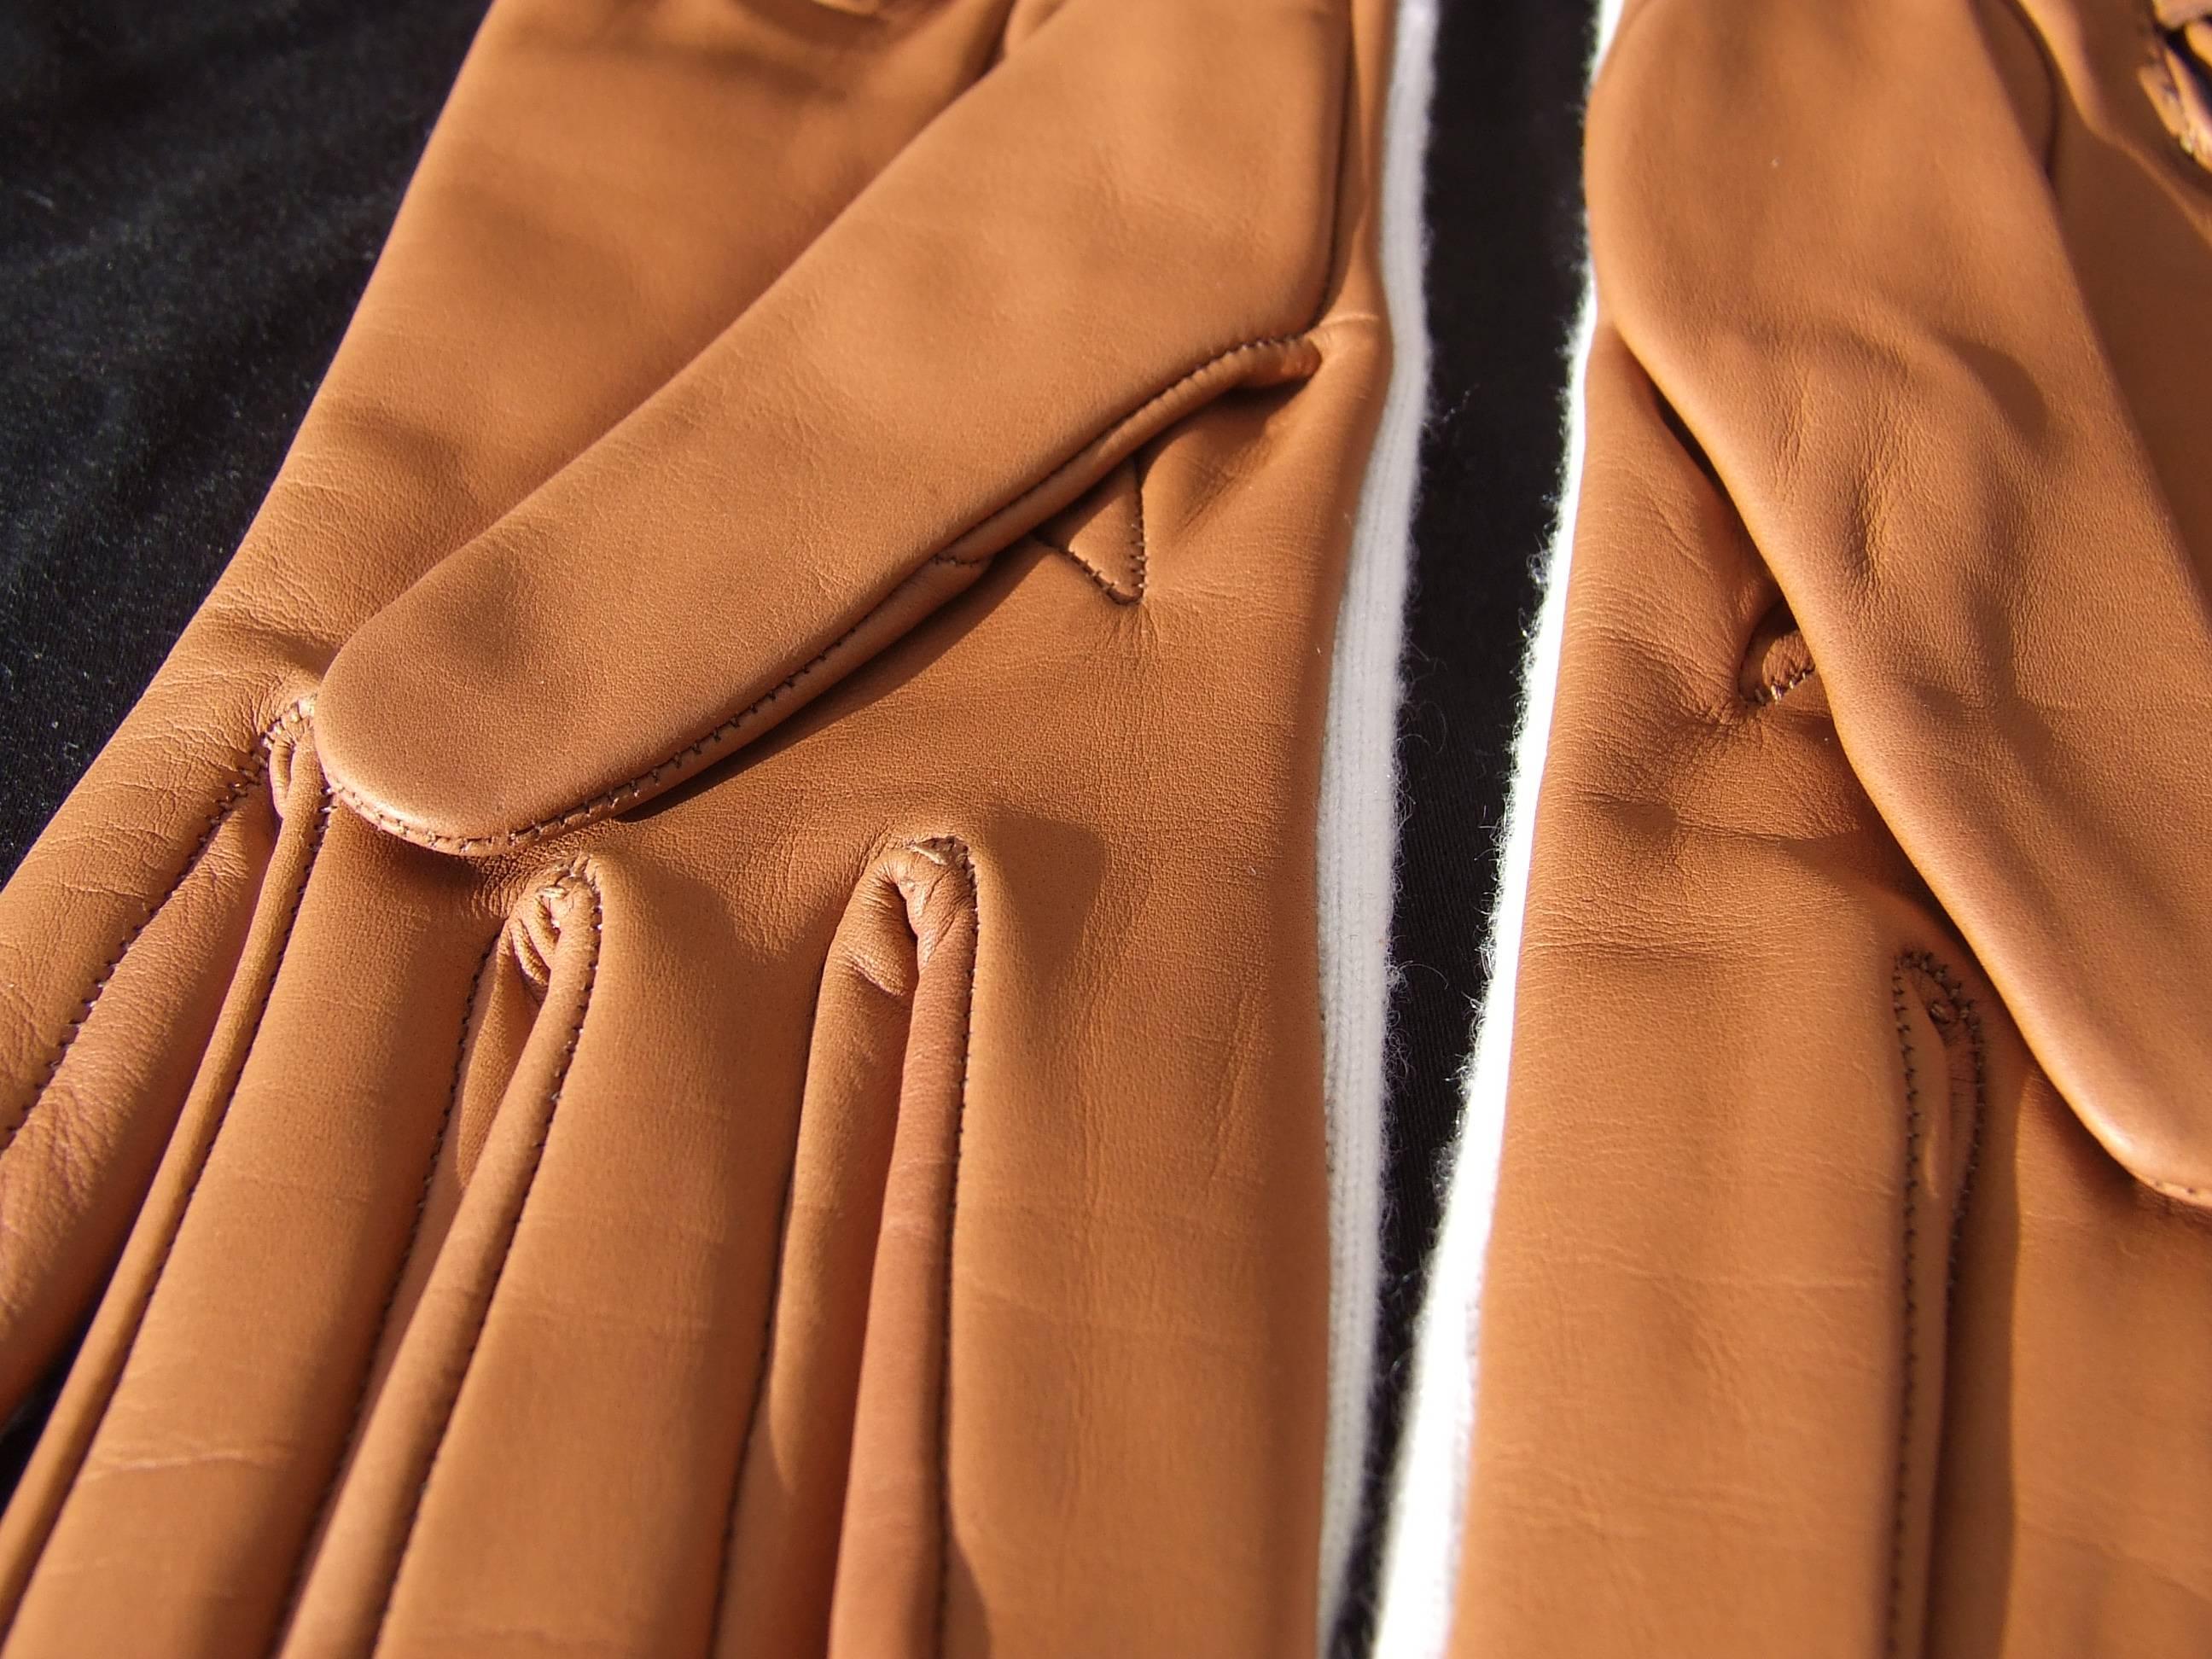 Hermès Helsinki Women Gloves in Cashmere and Leather Size 6, 5 For Sale 2